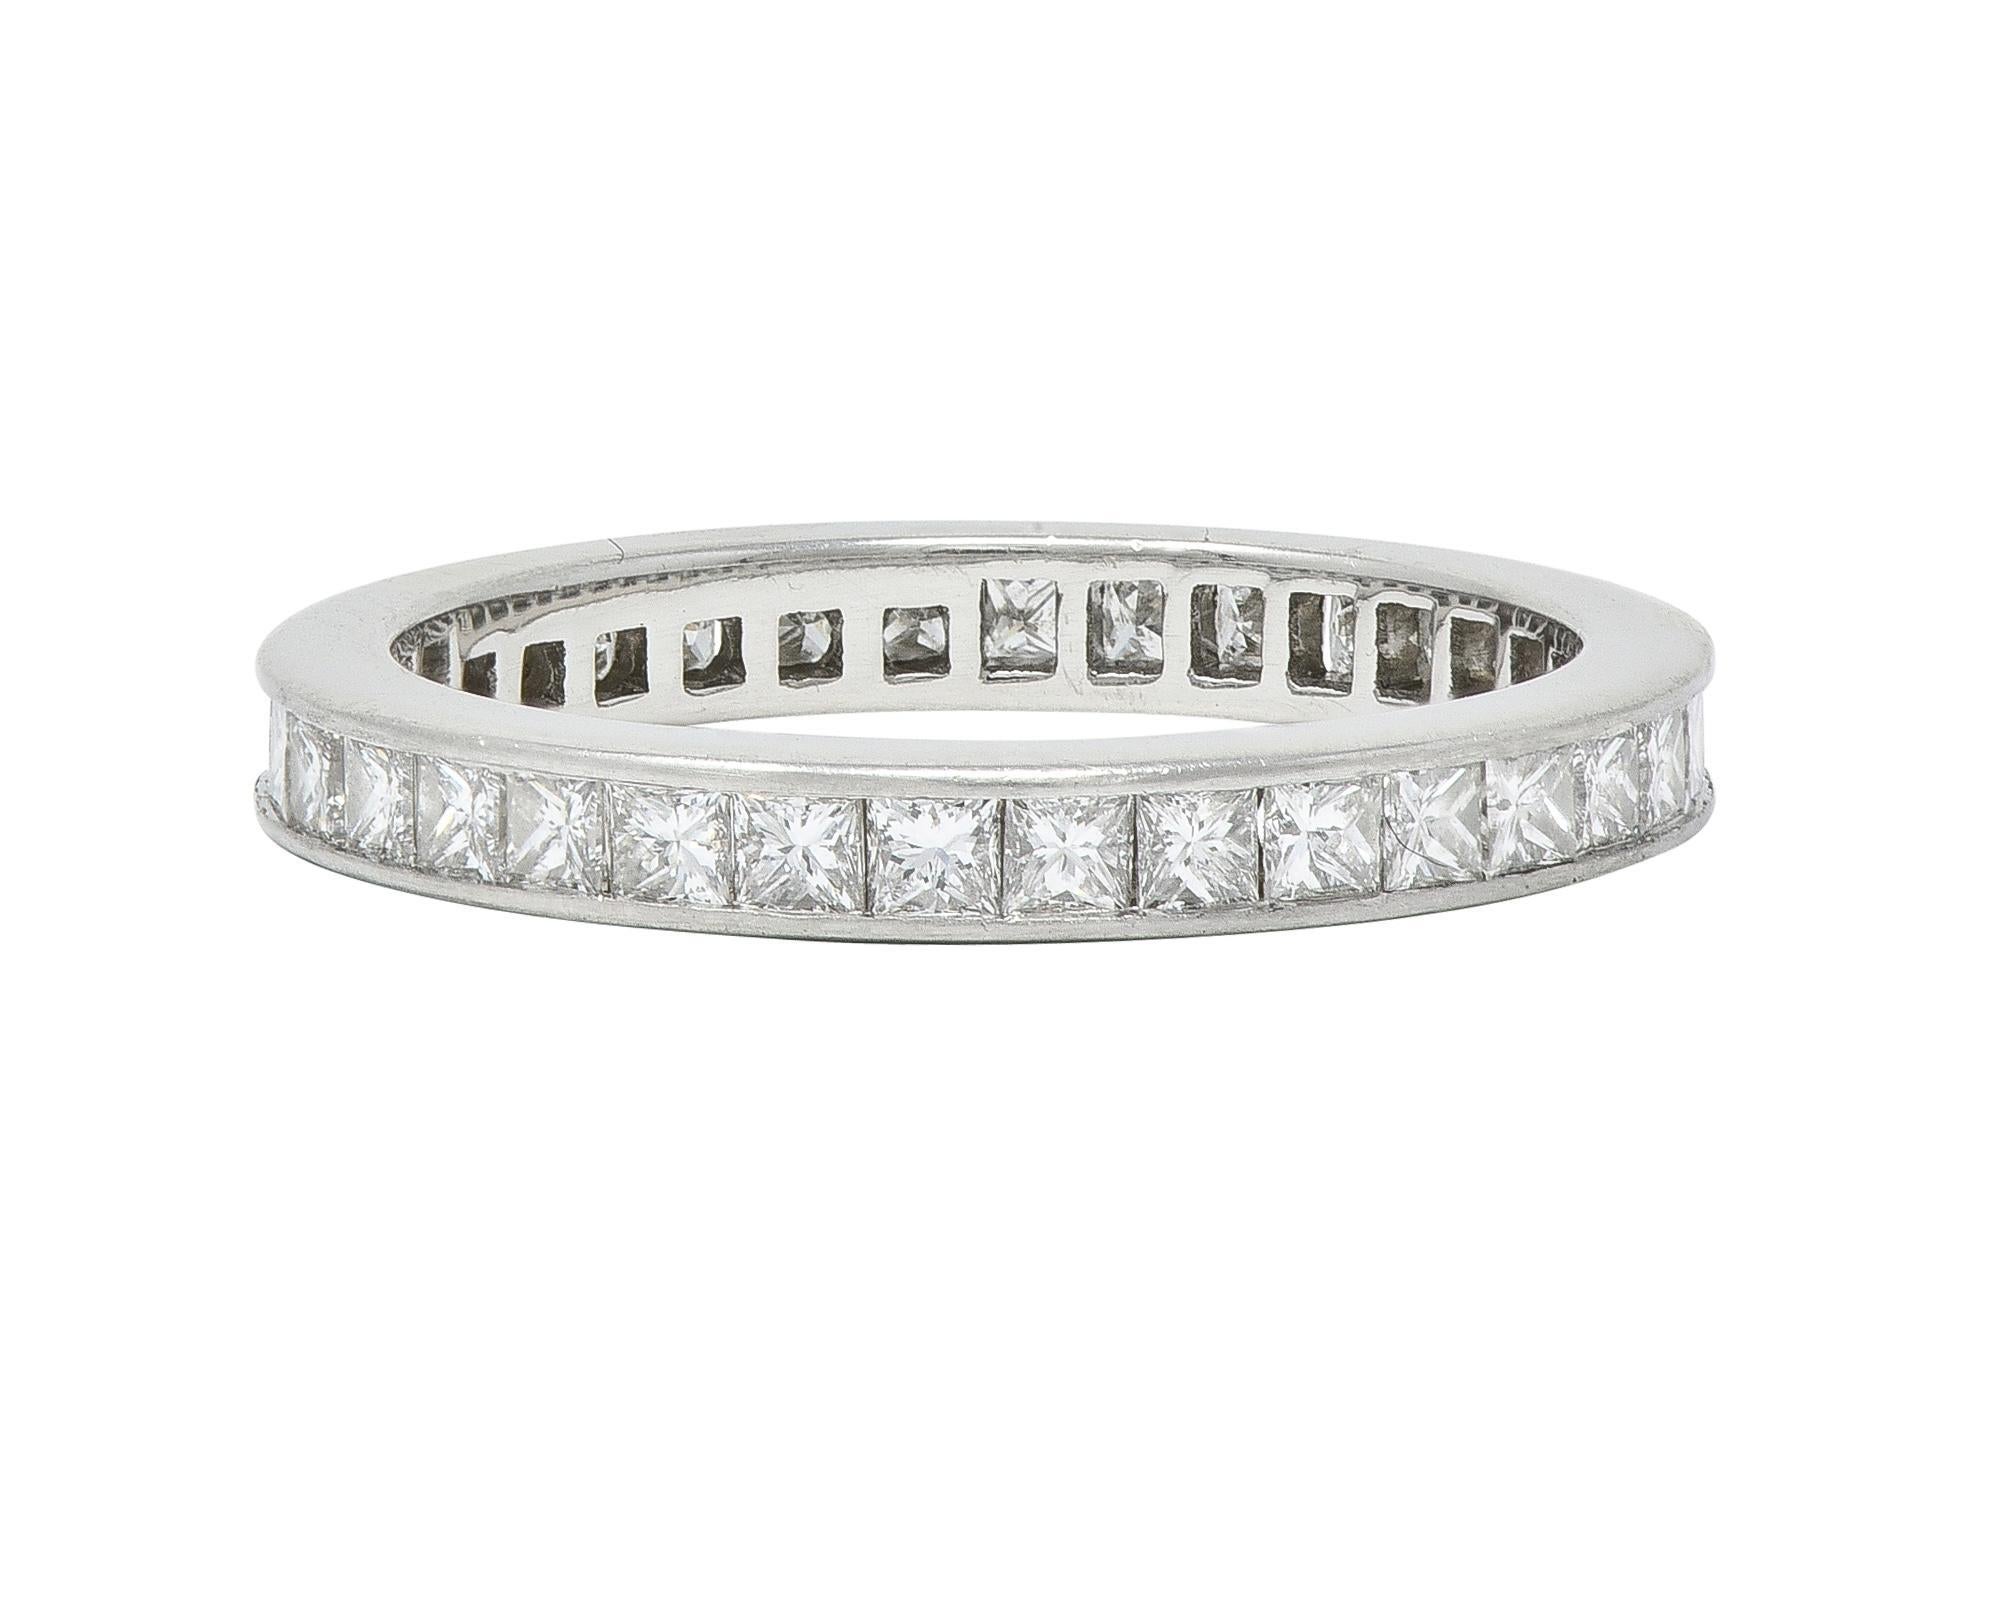 Tiffany & Co. 1.26 CTW Princess Cut Diamond Platinum Eternity Channel Band Ring In Excellent Condition For Sale In Philadelphia, PA